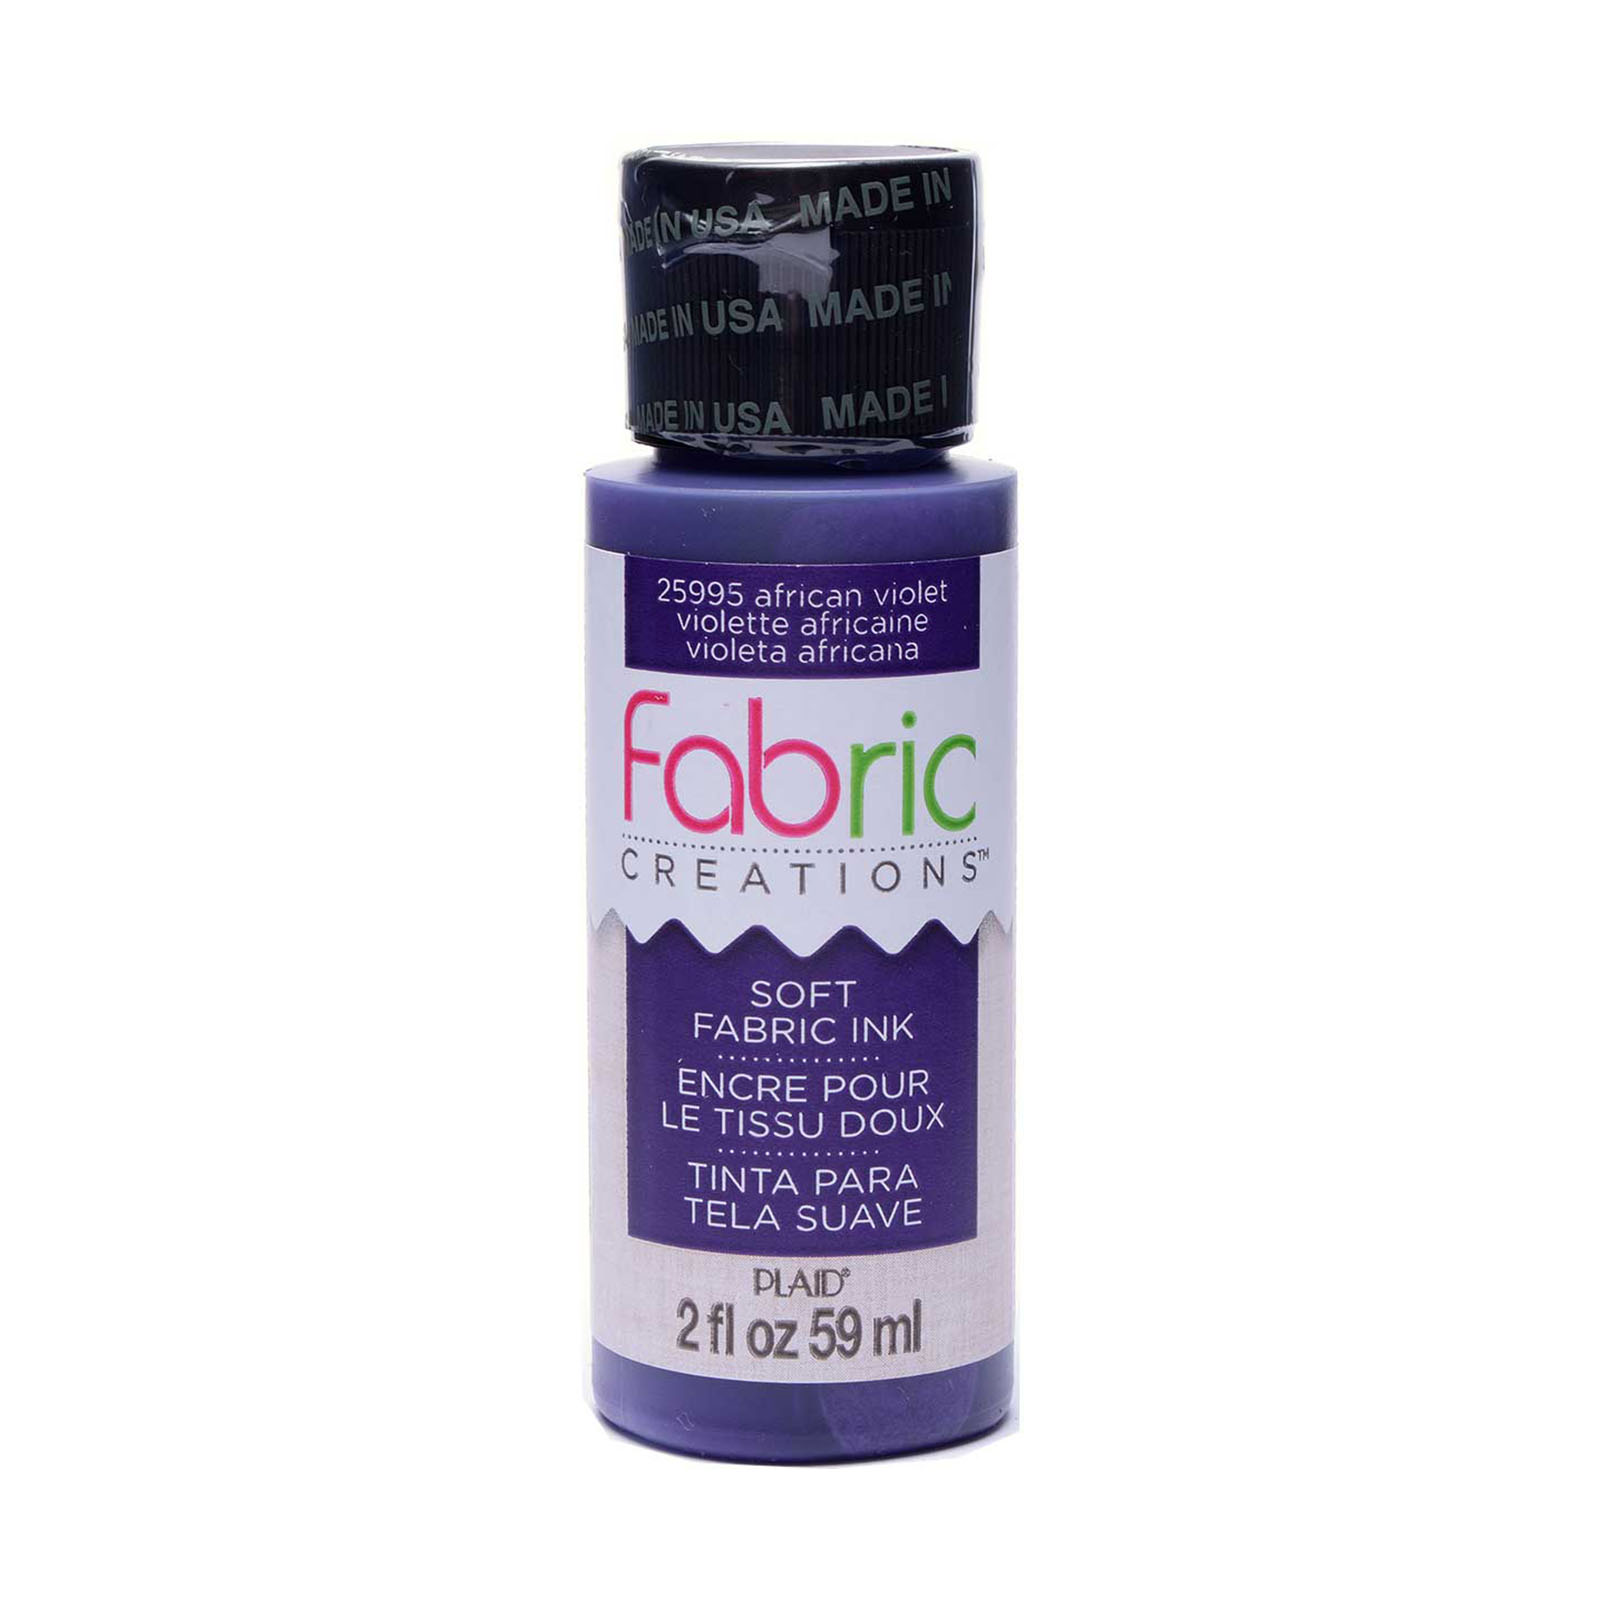 Fabric Creations • Soft fabric ink 59ml Wild violet